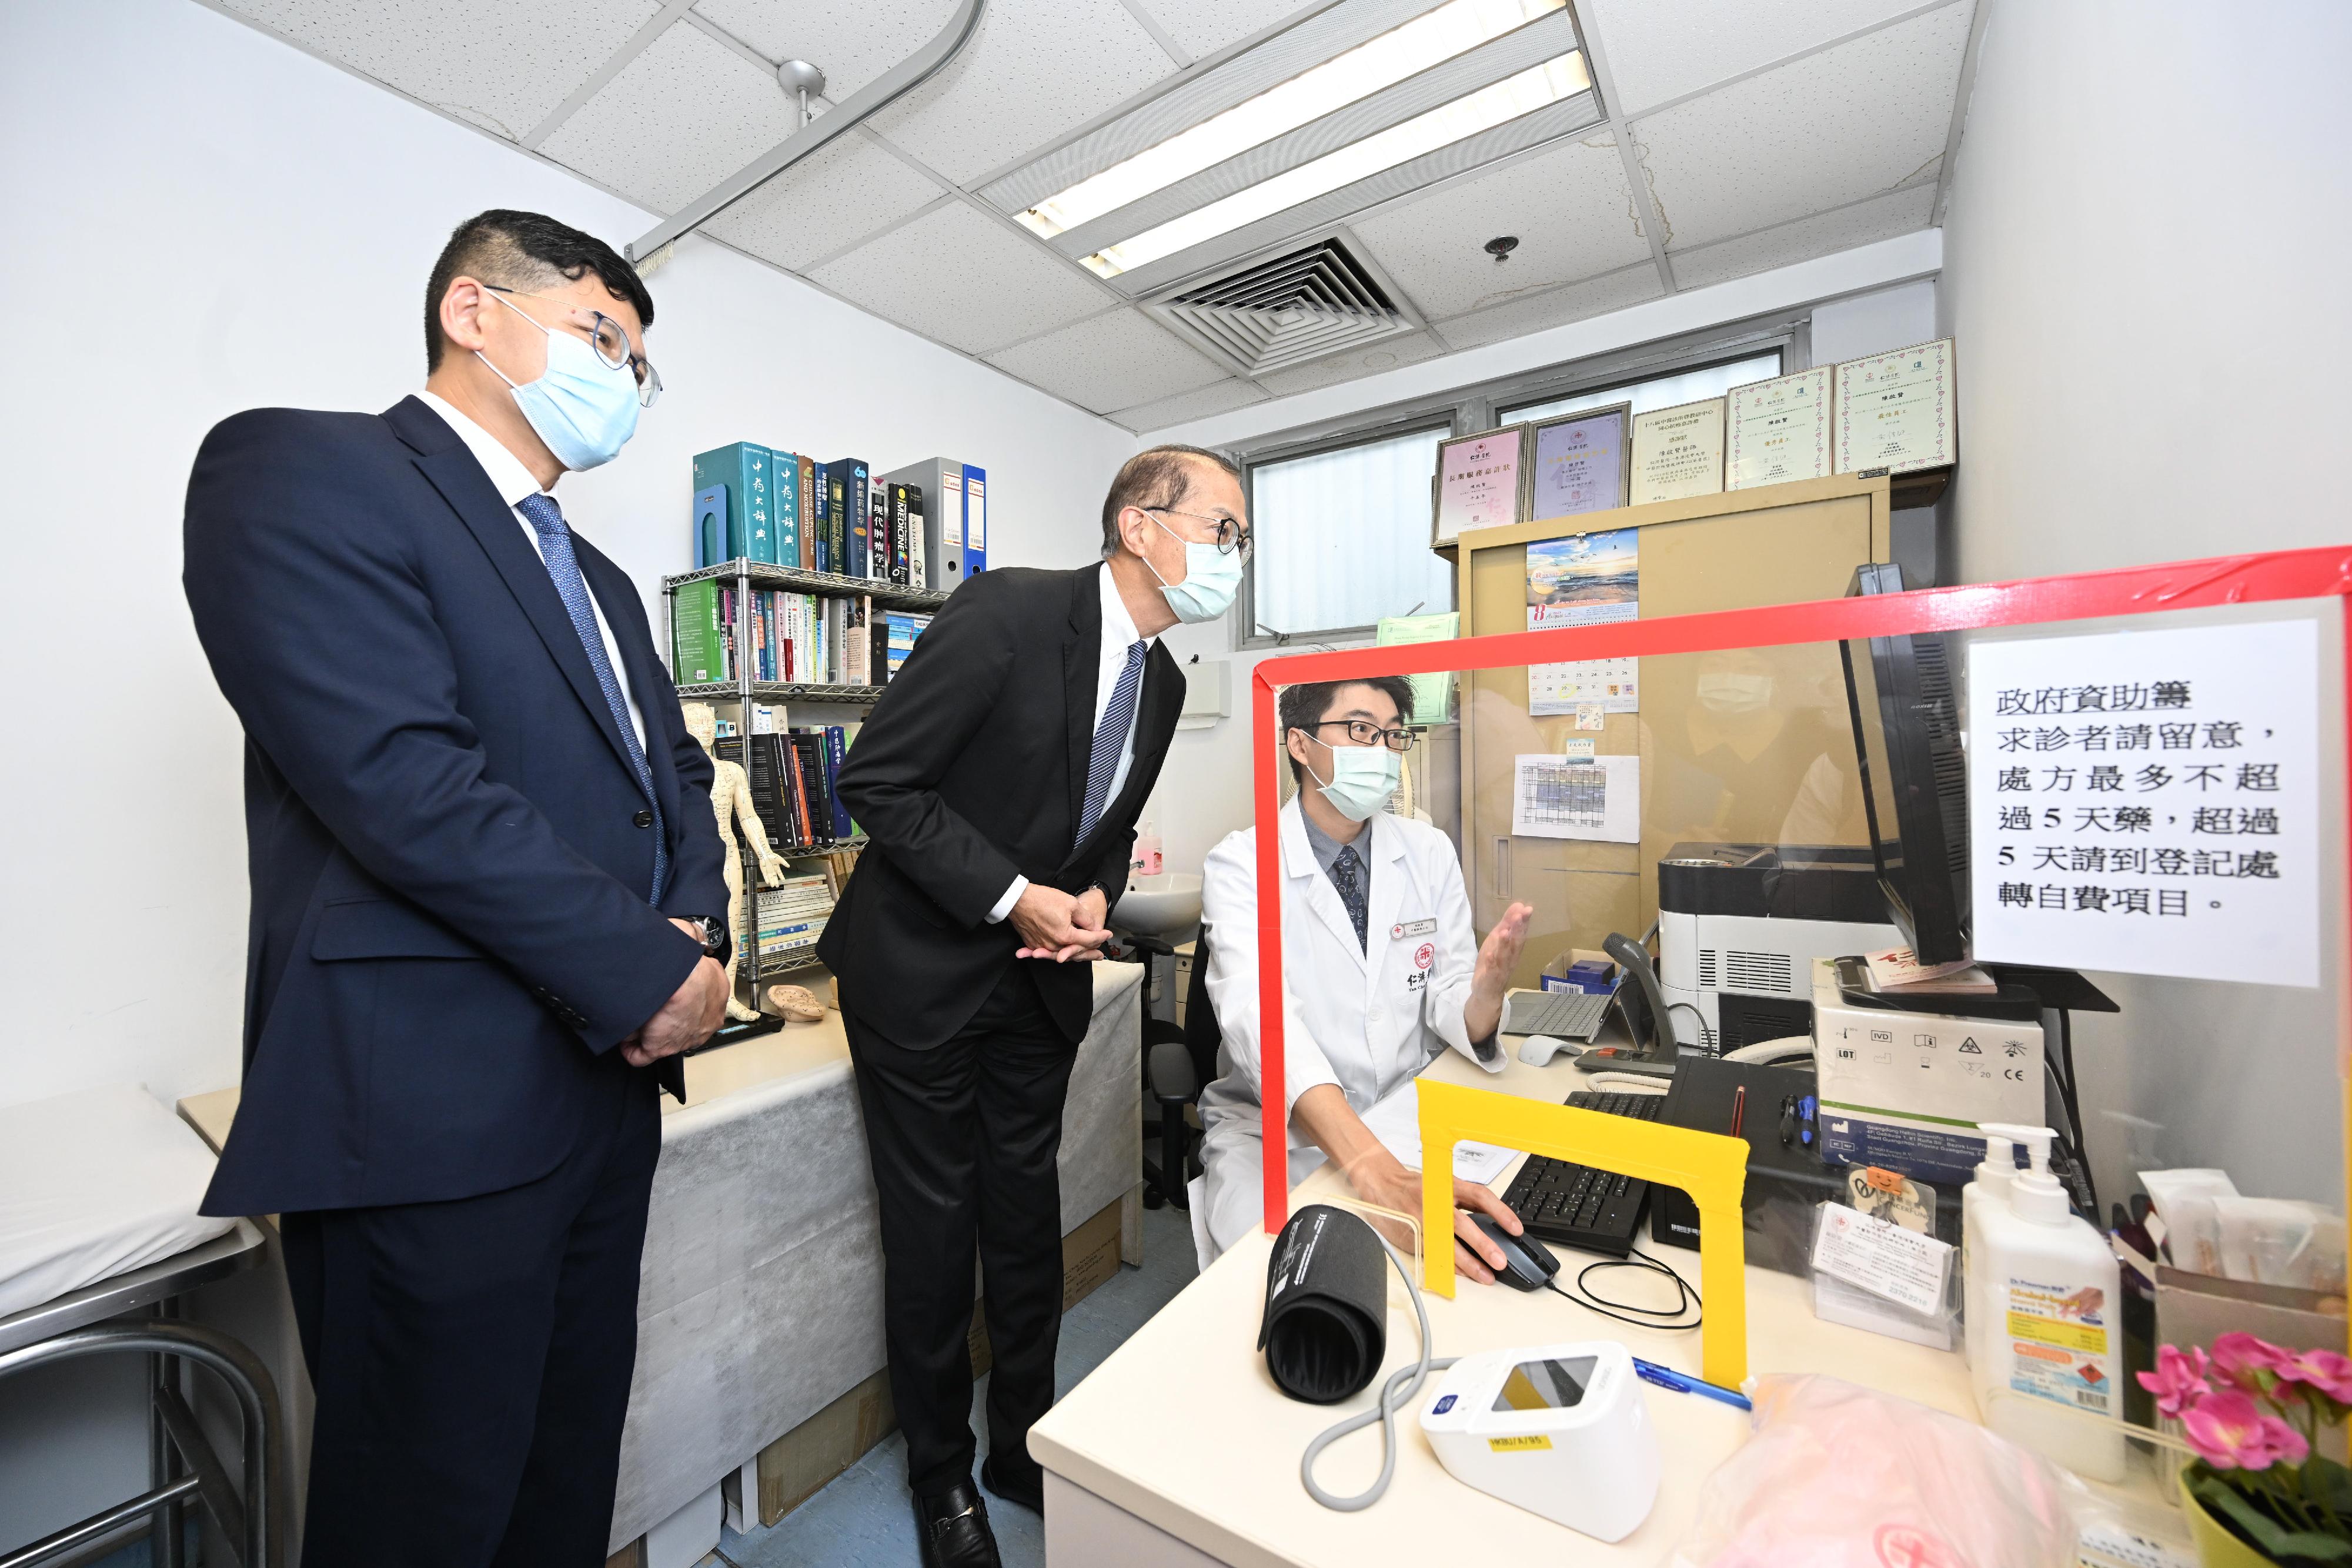 The Secretary for Health, Professor Lo Chung-mau (centre), learns about the consultation arrangement at the Chinese Medicine Clinic cum Training and Research Centre in Kwai Tsing District today (August 29).